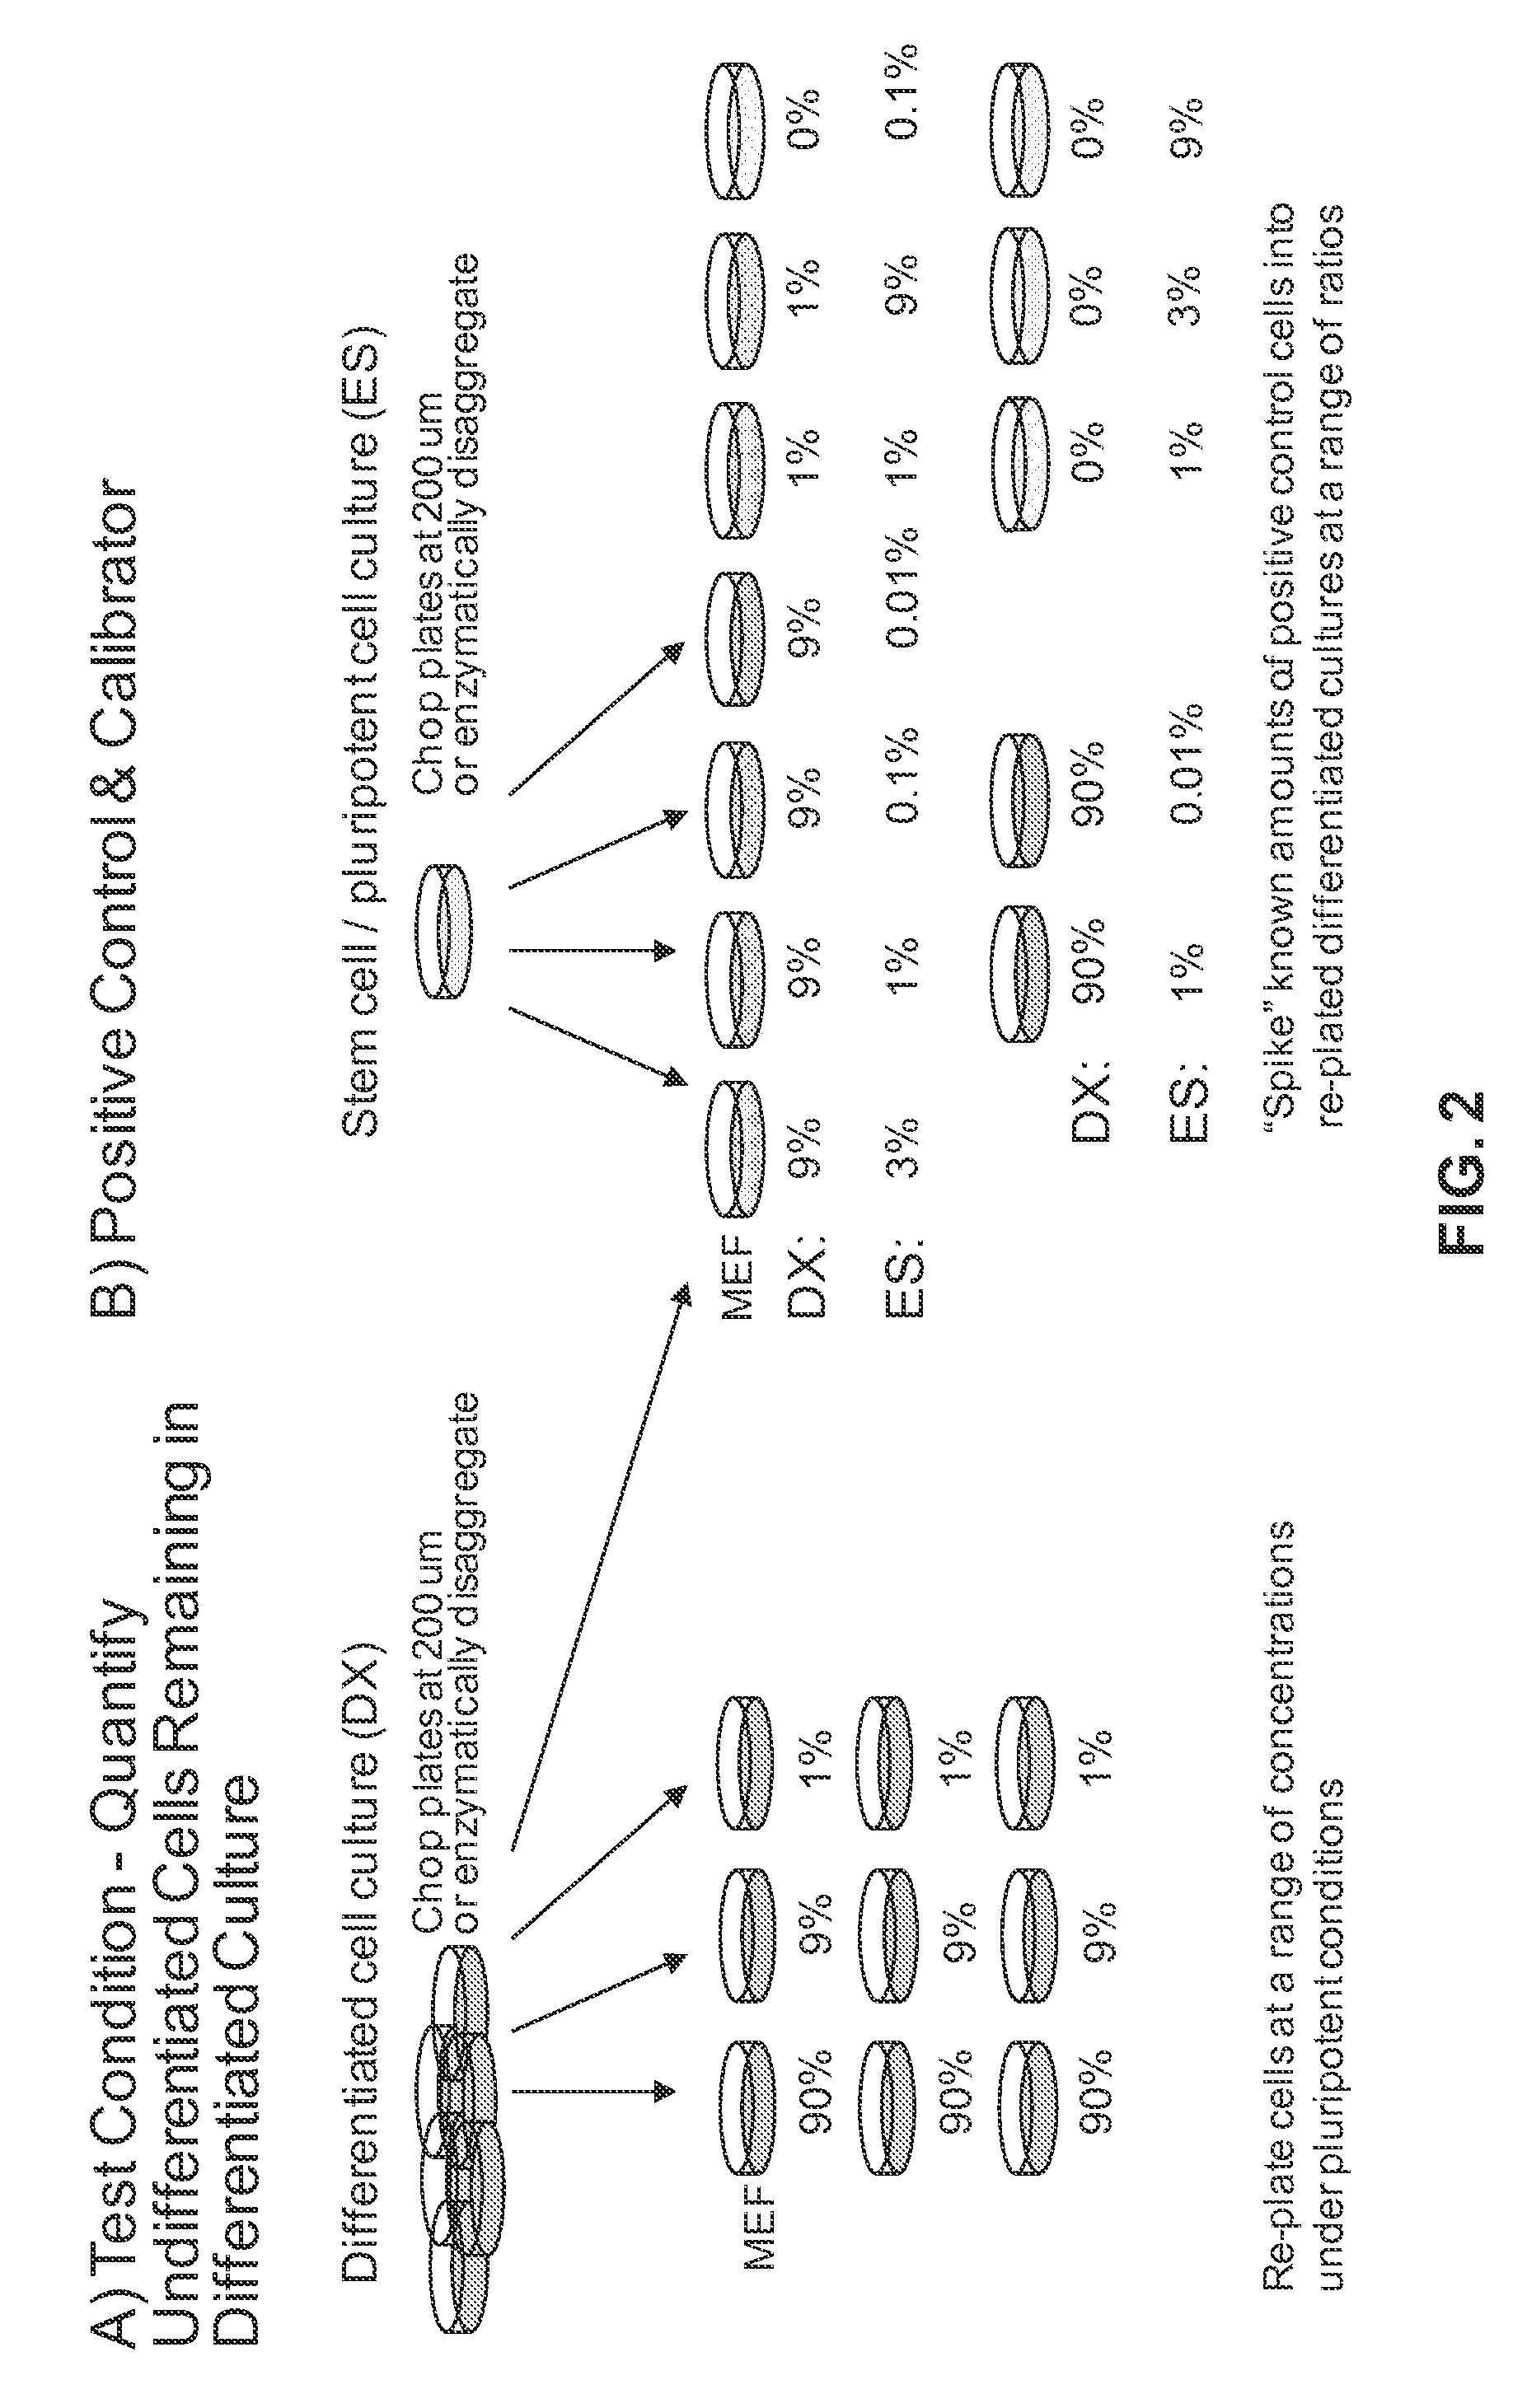 Agents and methods for inhibiting human pluripotent stem cell growth